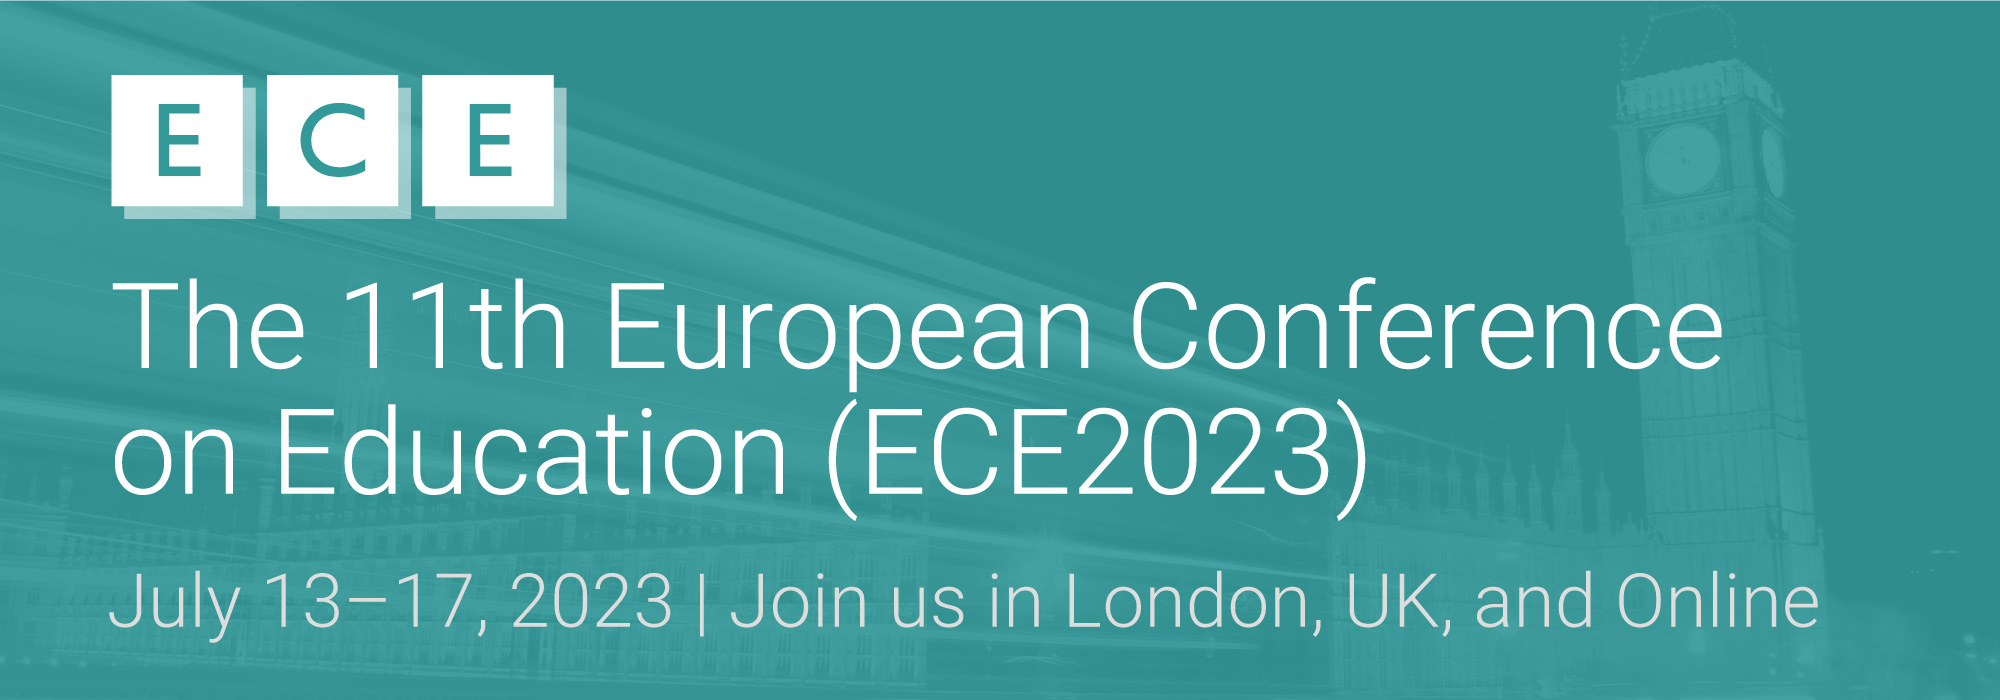 The 11th European Conference on Education ECE2023 Logo